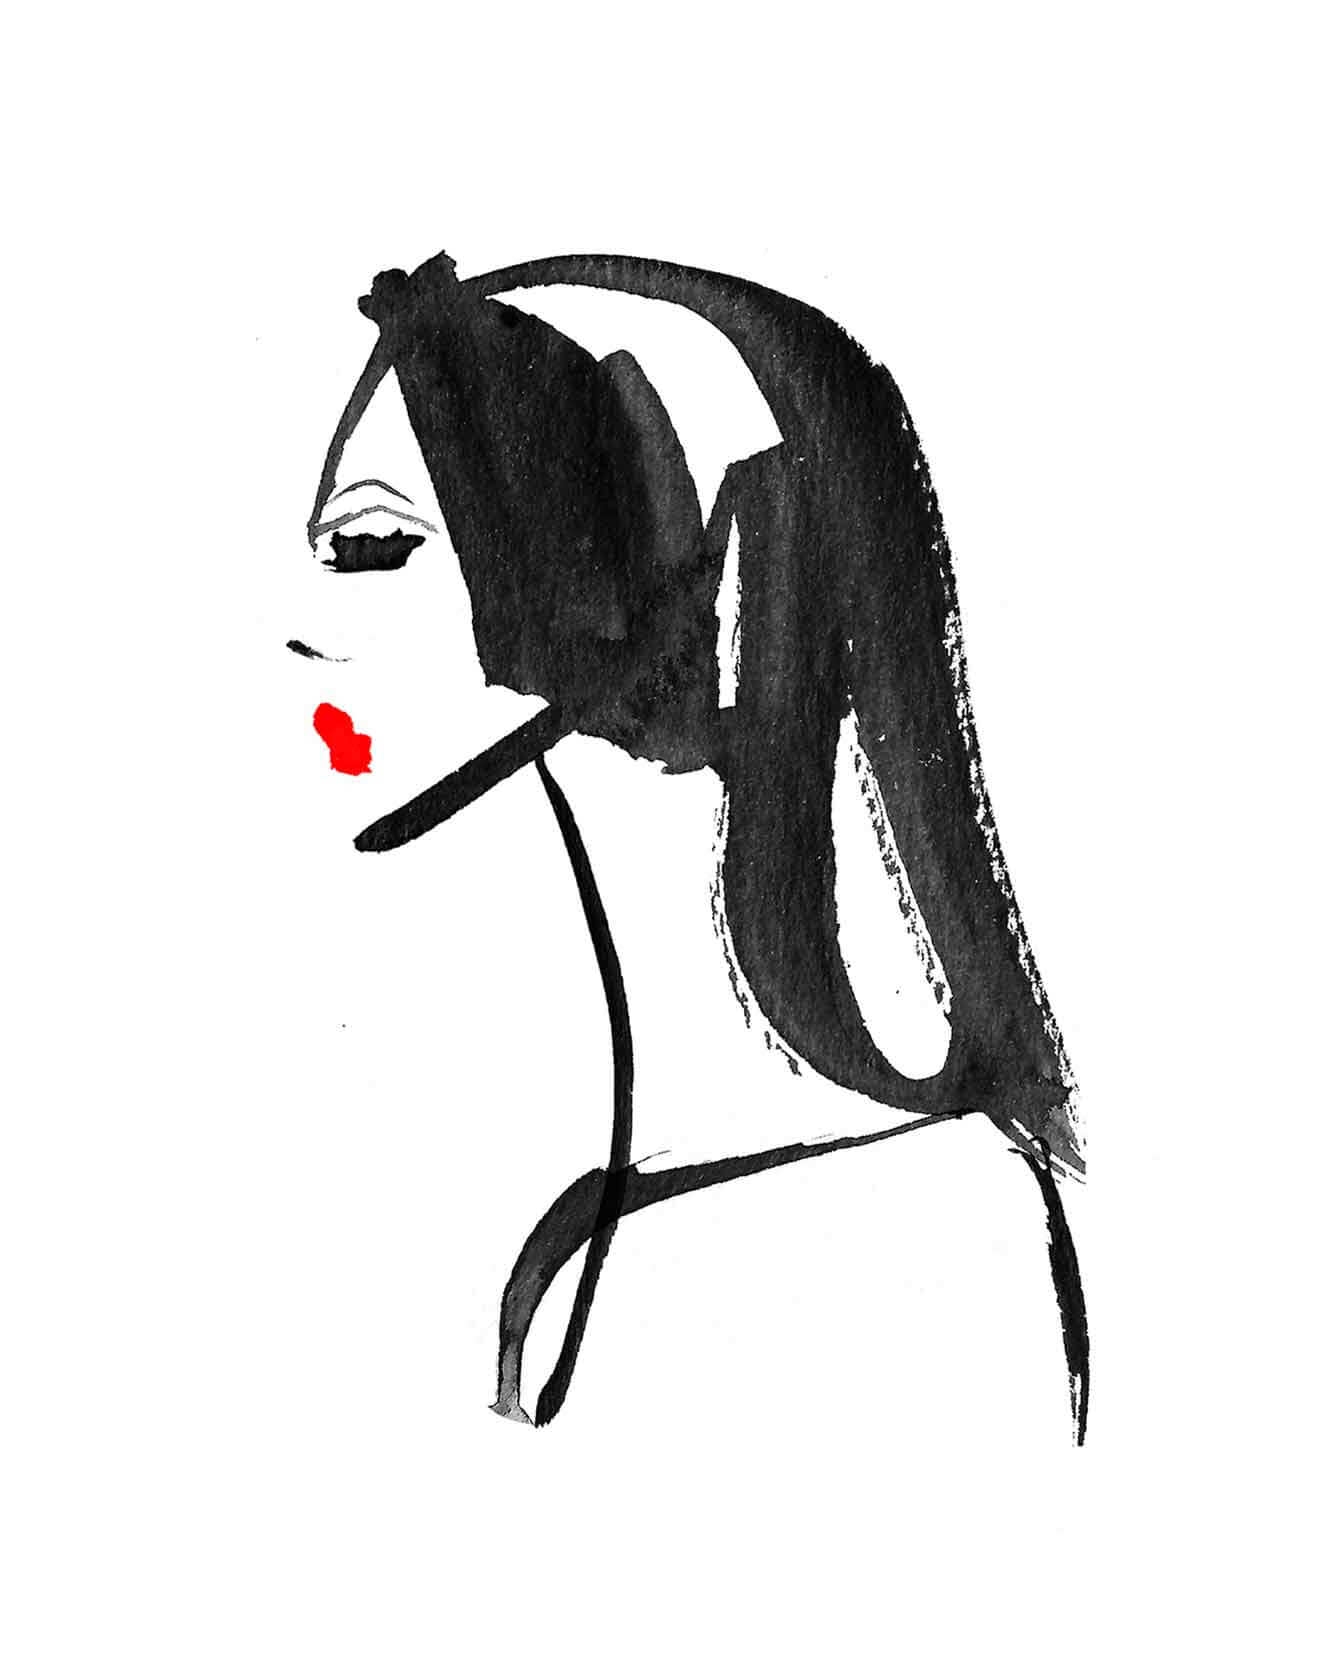 Illustrations for International Women's Day, individual profile drawings. Inky lines fashion illustration inspired illustration. Illustration style of bold black inky brush stroke marks. With simple black ink links and red lipstick.